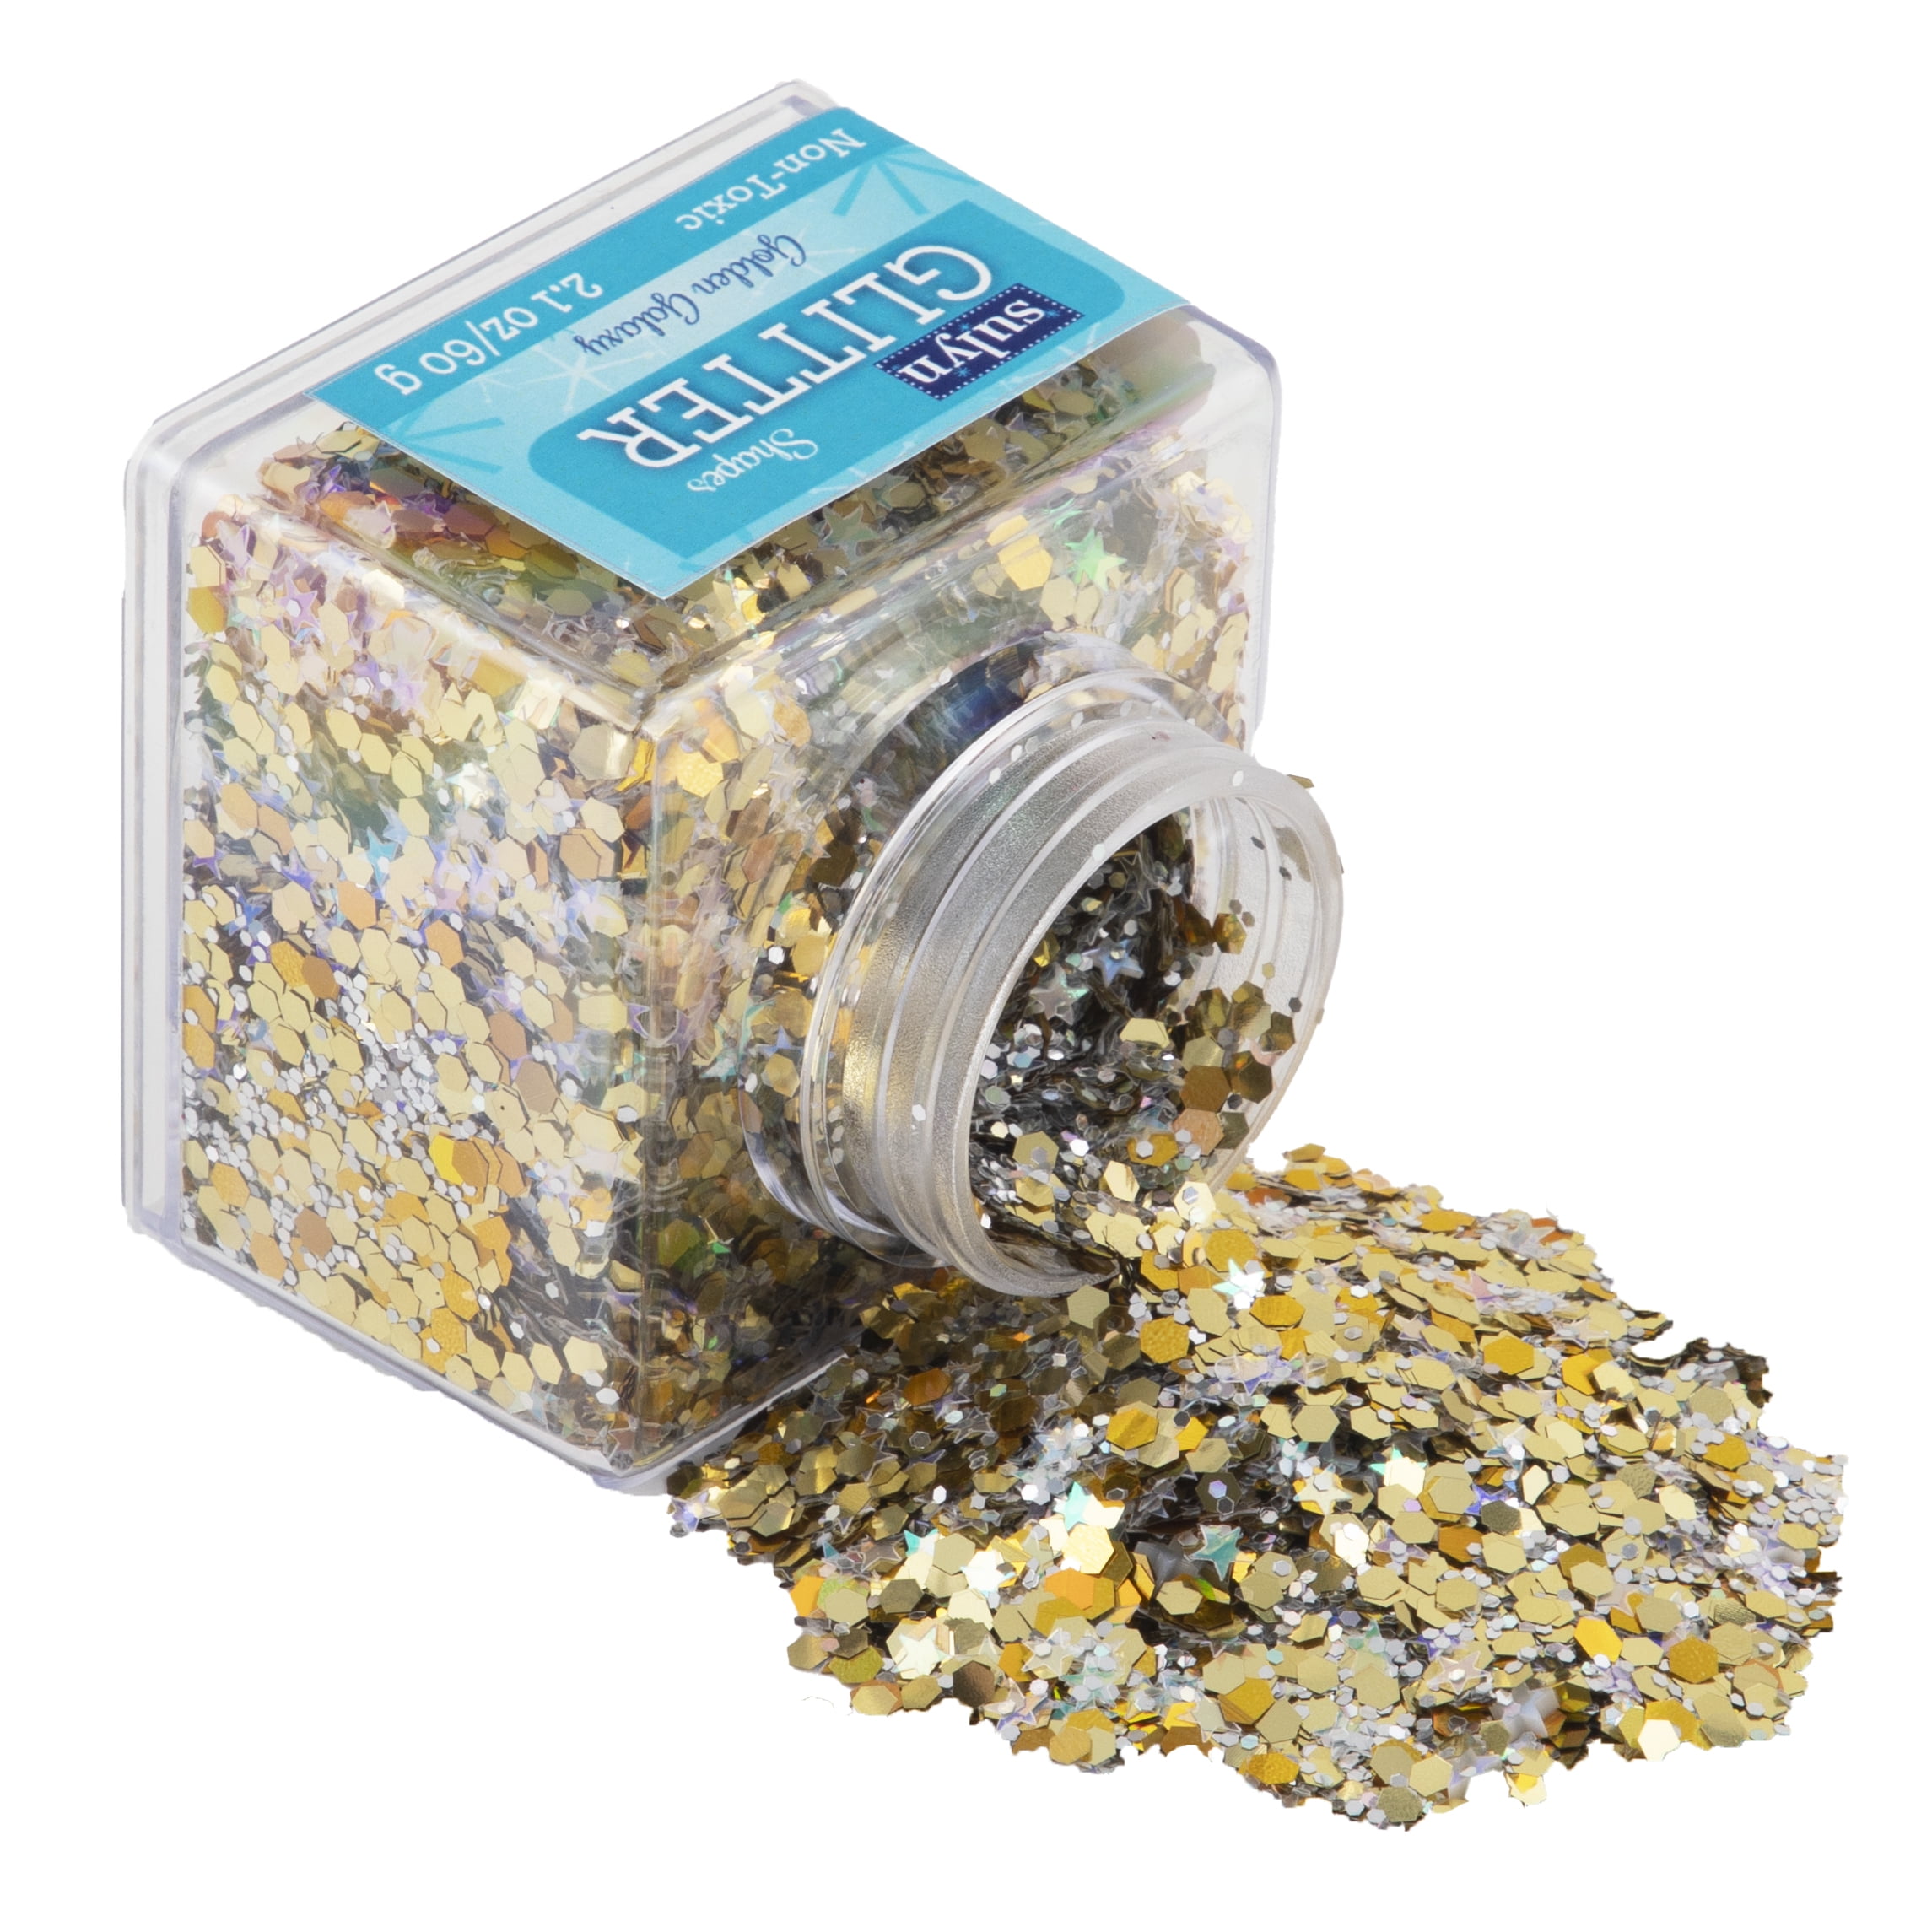 Sulyn Holographic Glitter Sample Pack, Non-Toxic Variety Pack, 9 Assorted  Colors, 0.63 ounces, 18 grams, SUL6654-97